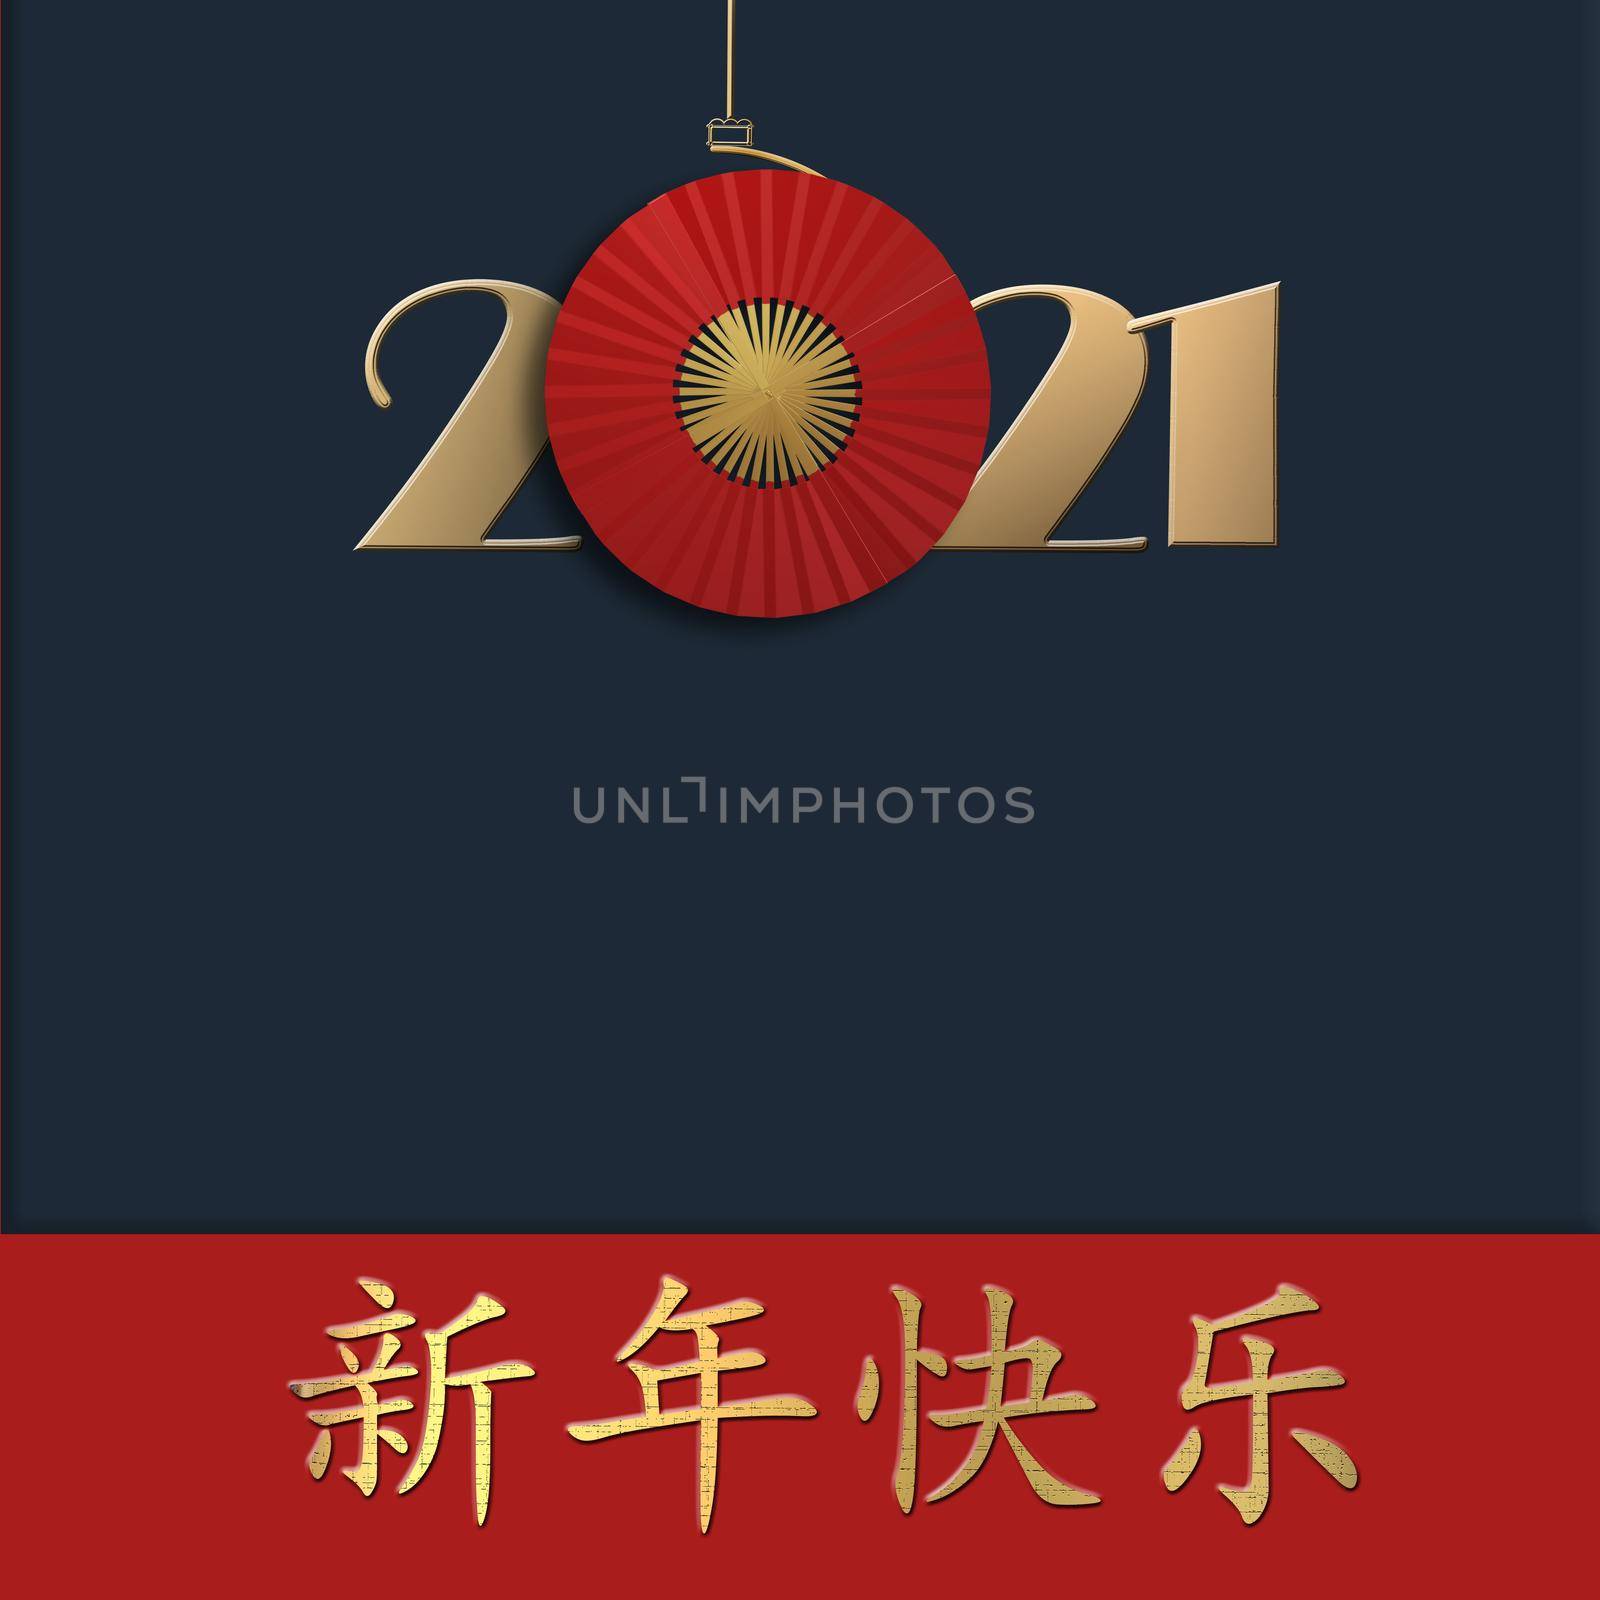 Chinese 2021 new year by NelliPolk